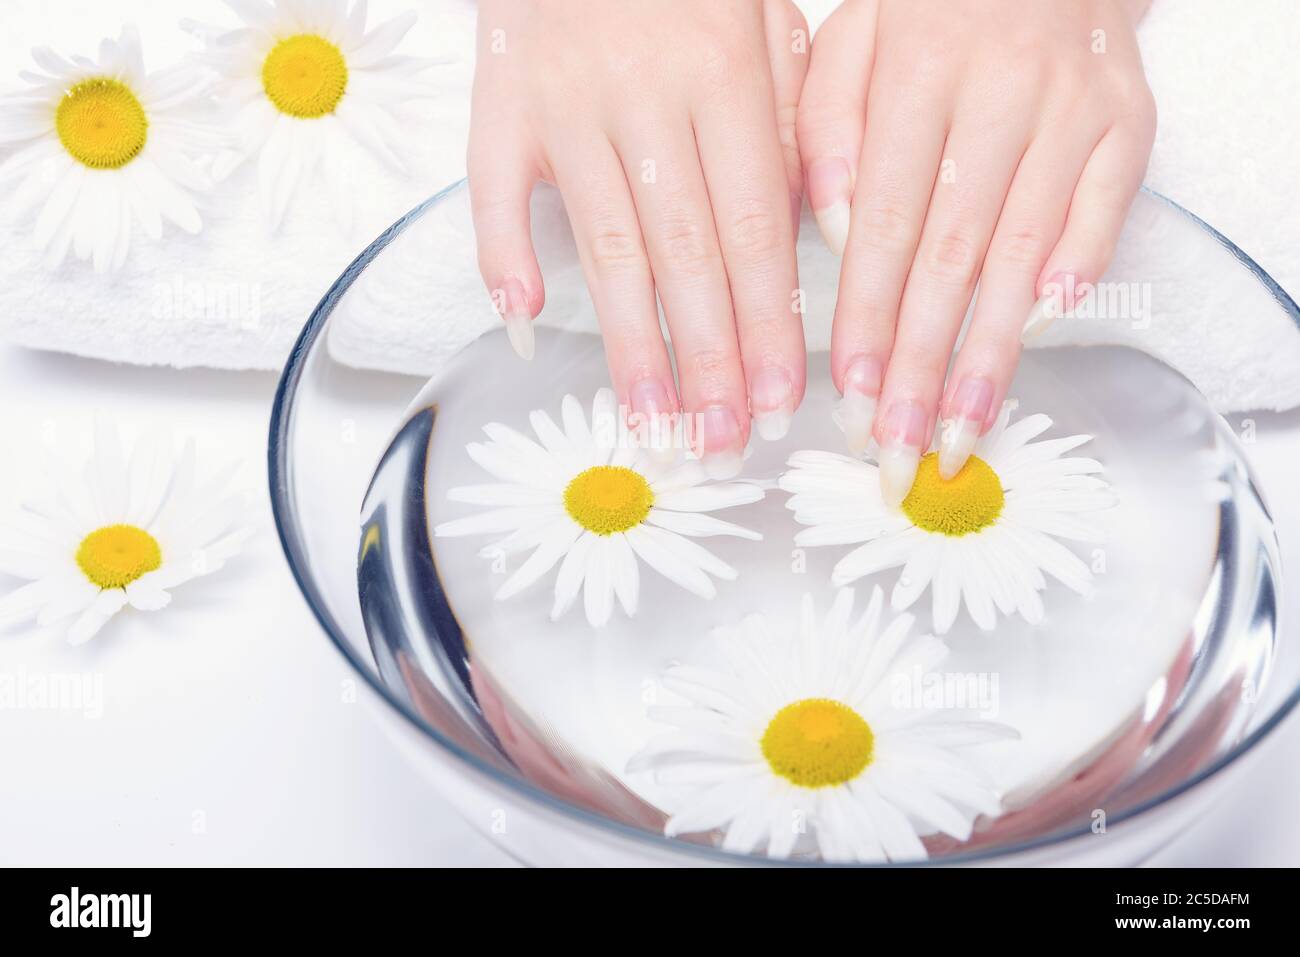 Concept of healthy hands and nails. Spa treatments for nails close-up. Procedure for treating nails in spa salon. Close-up hands of young woman with n Stock Photo